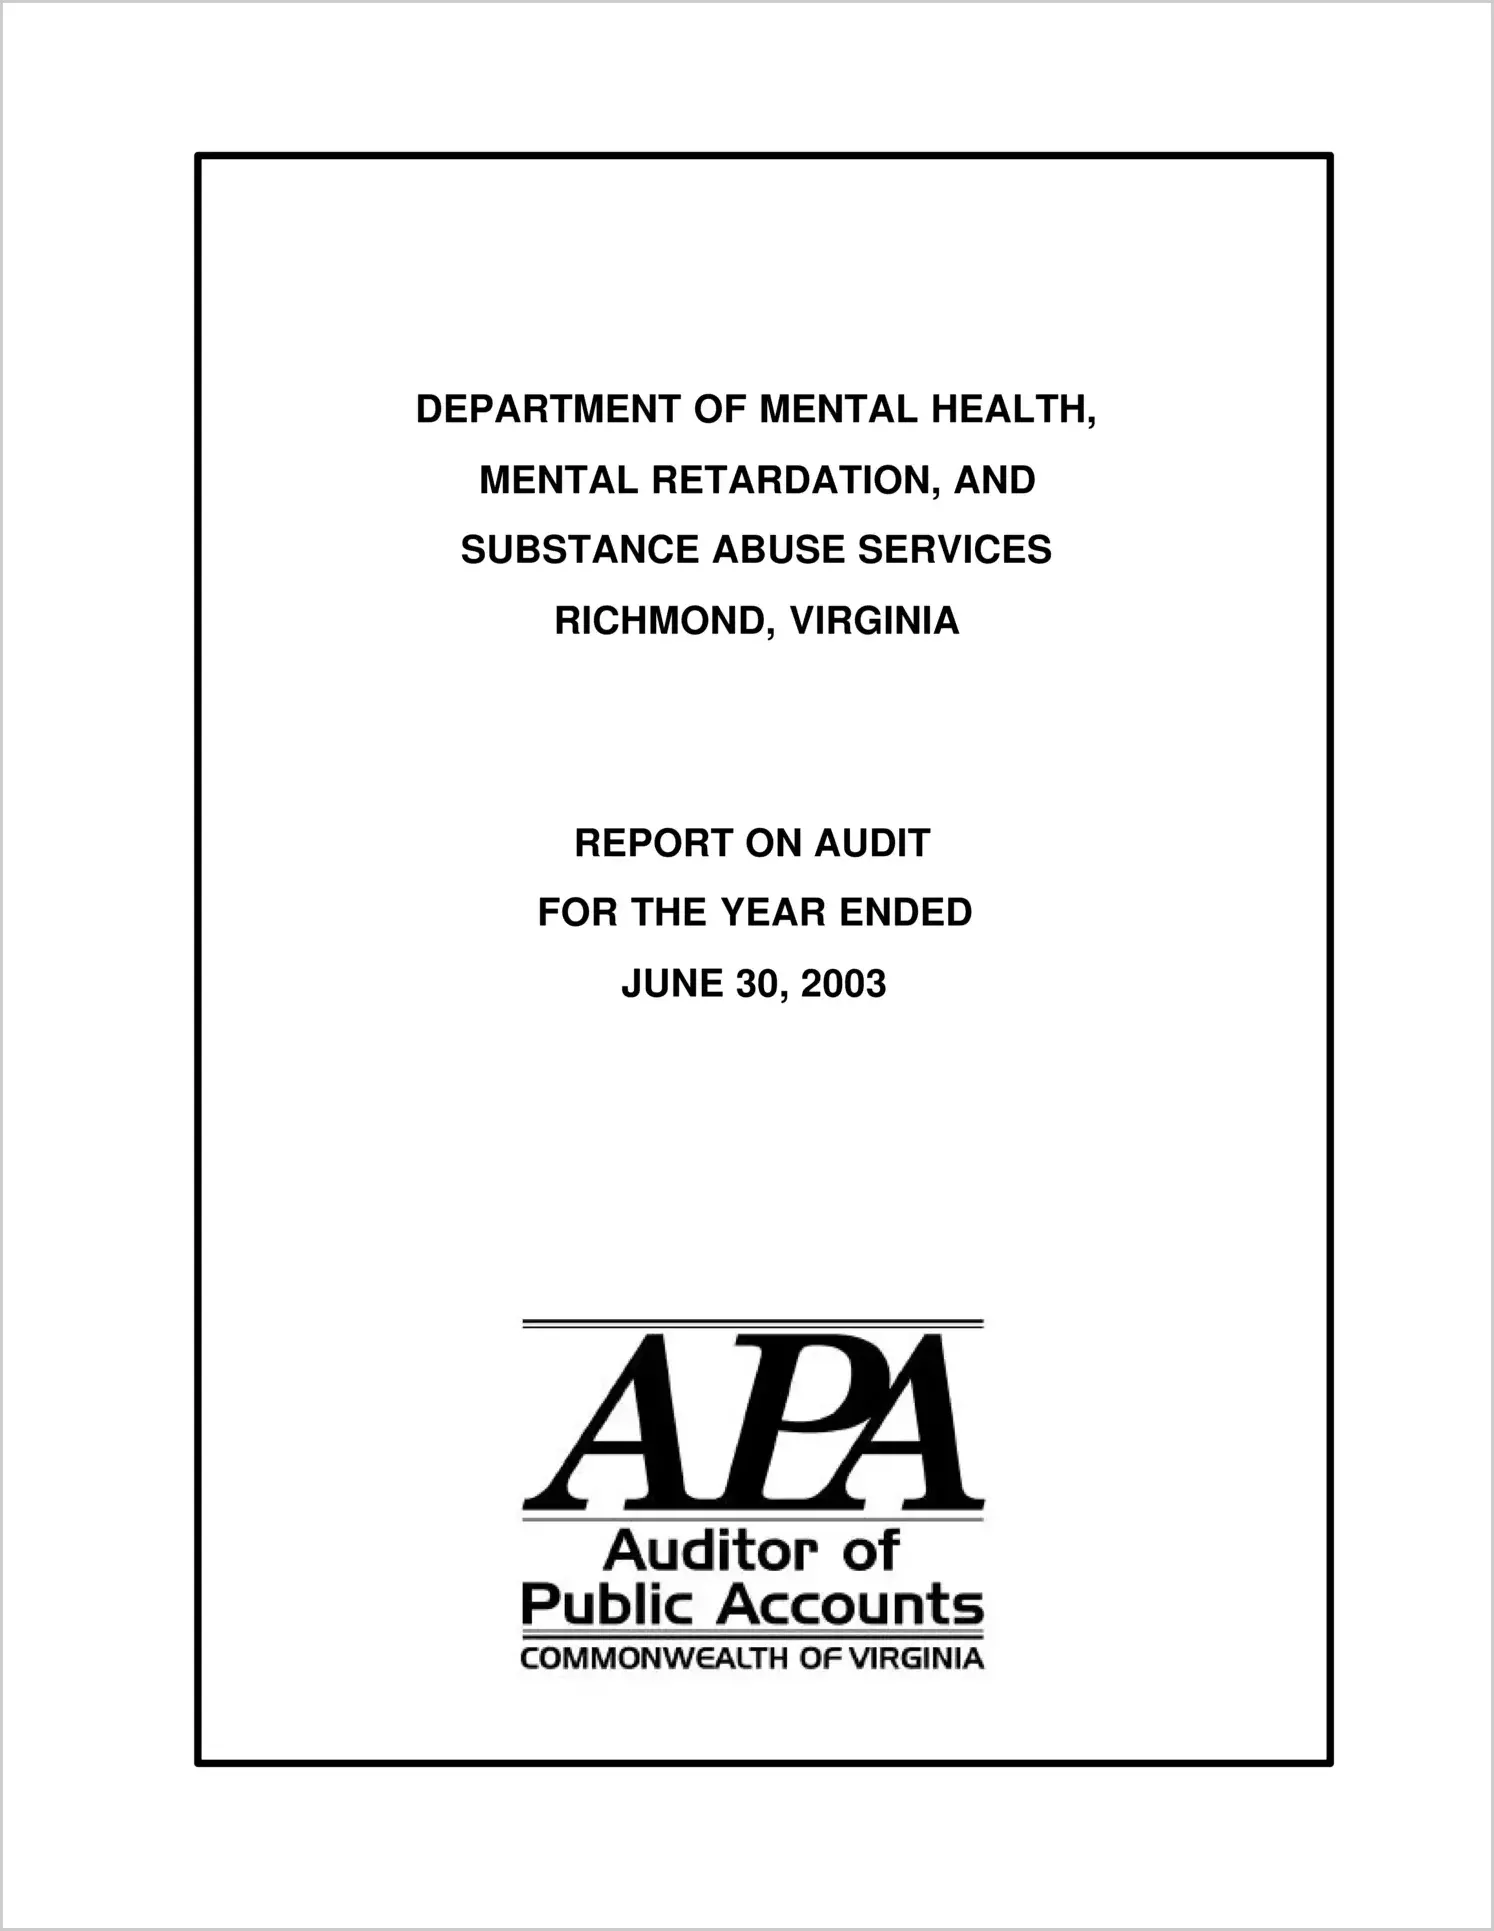 Department of Mental Health, Mental Retardation, and Substance Abuse Services for the year ended June 30, 2003